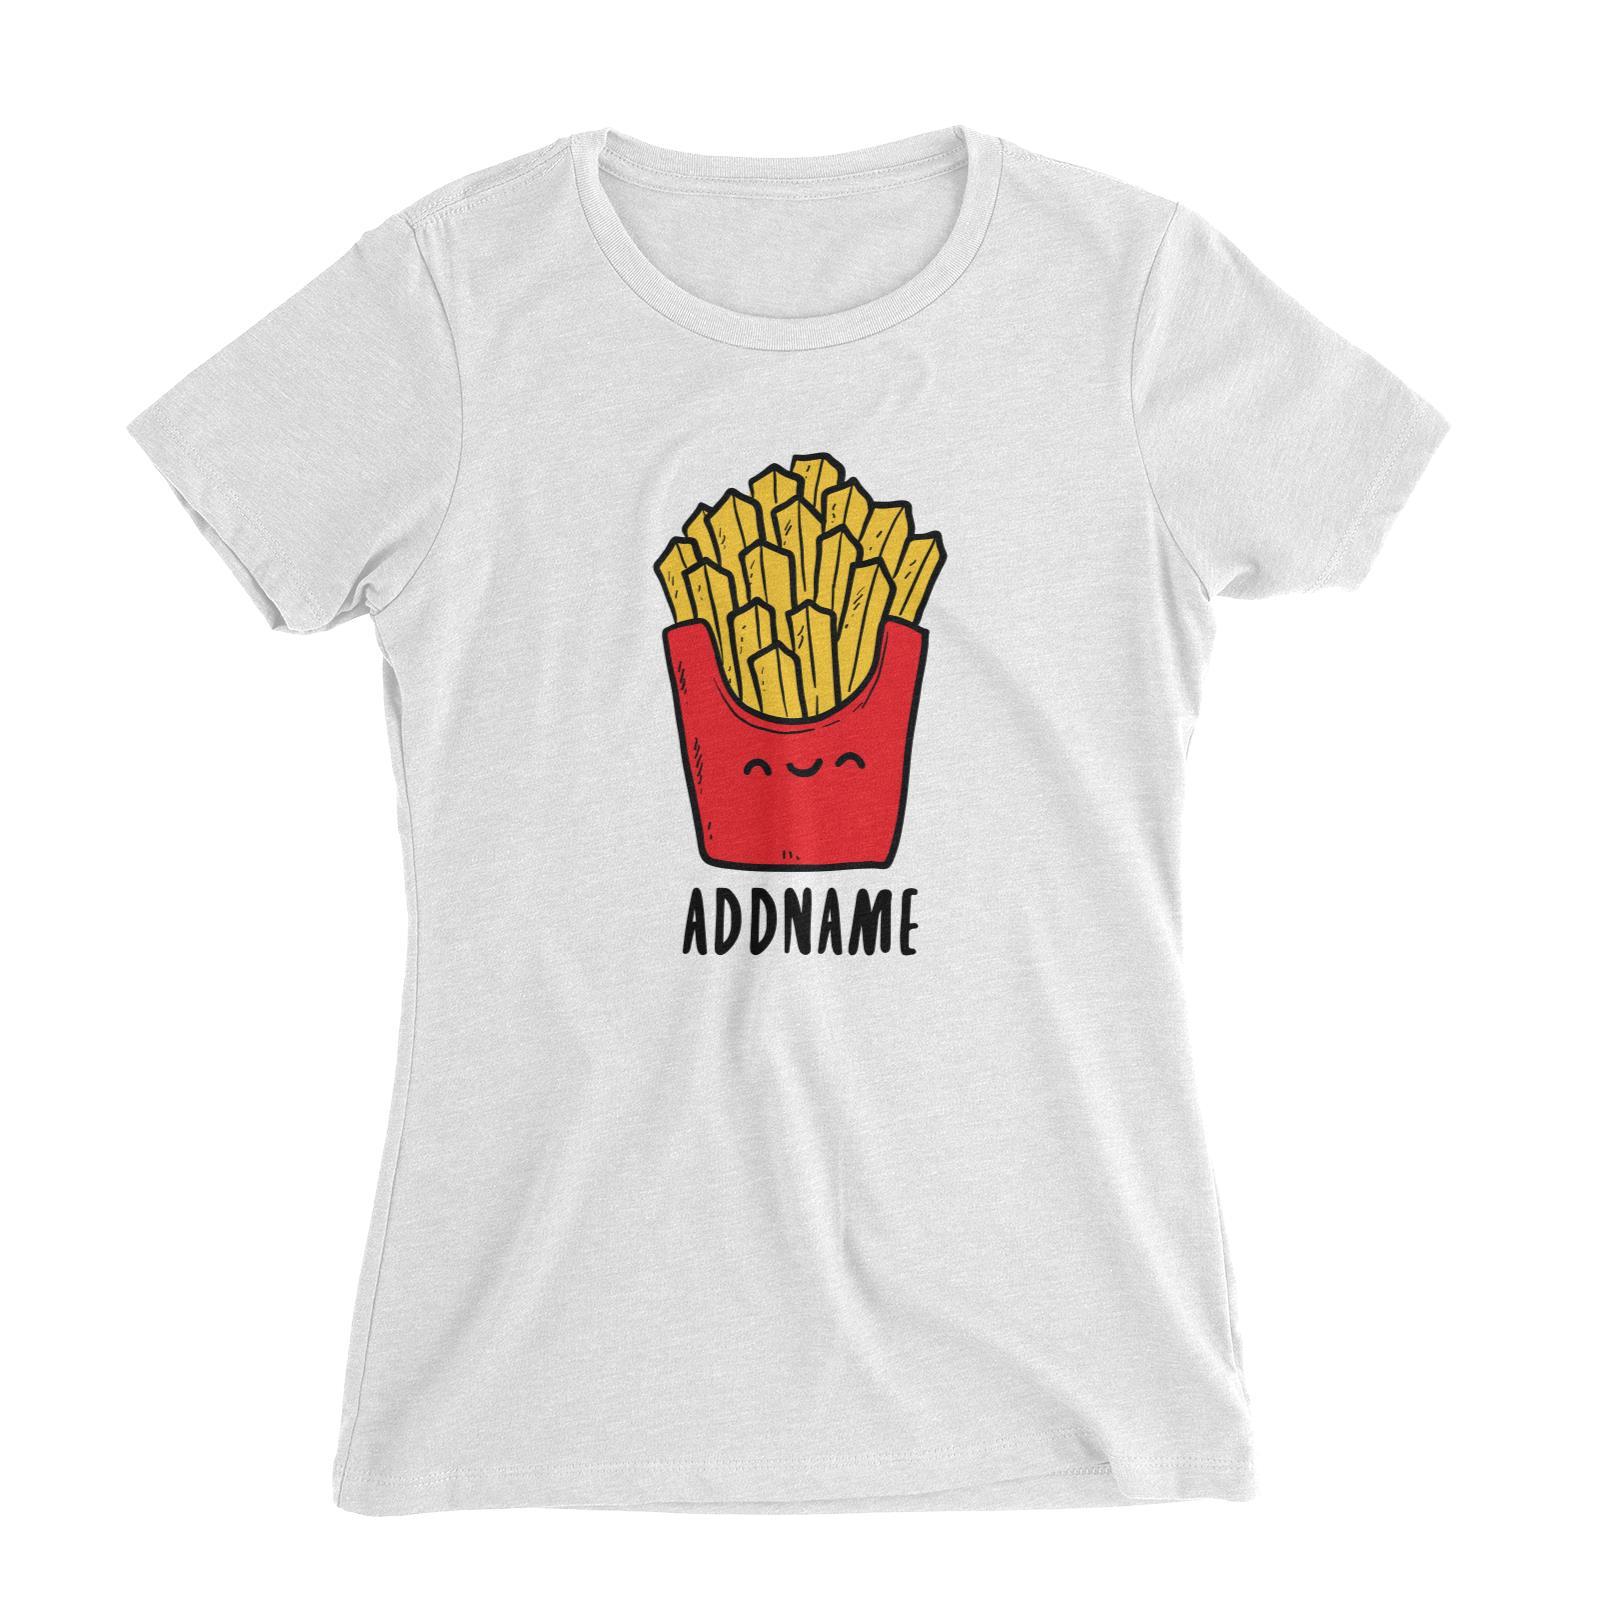 Fast Food Fries Addname Women's Slim Fit T-Shirt  Matching Family Comic Cartoon Personalizable Designs